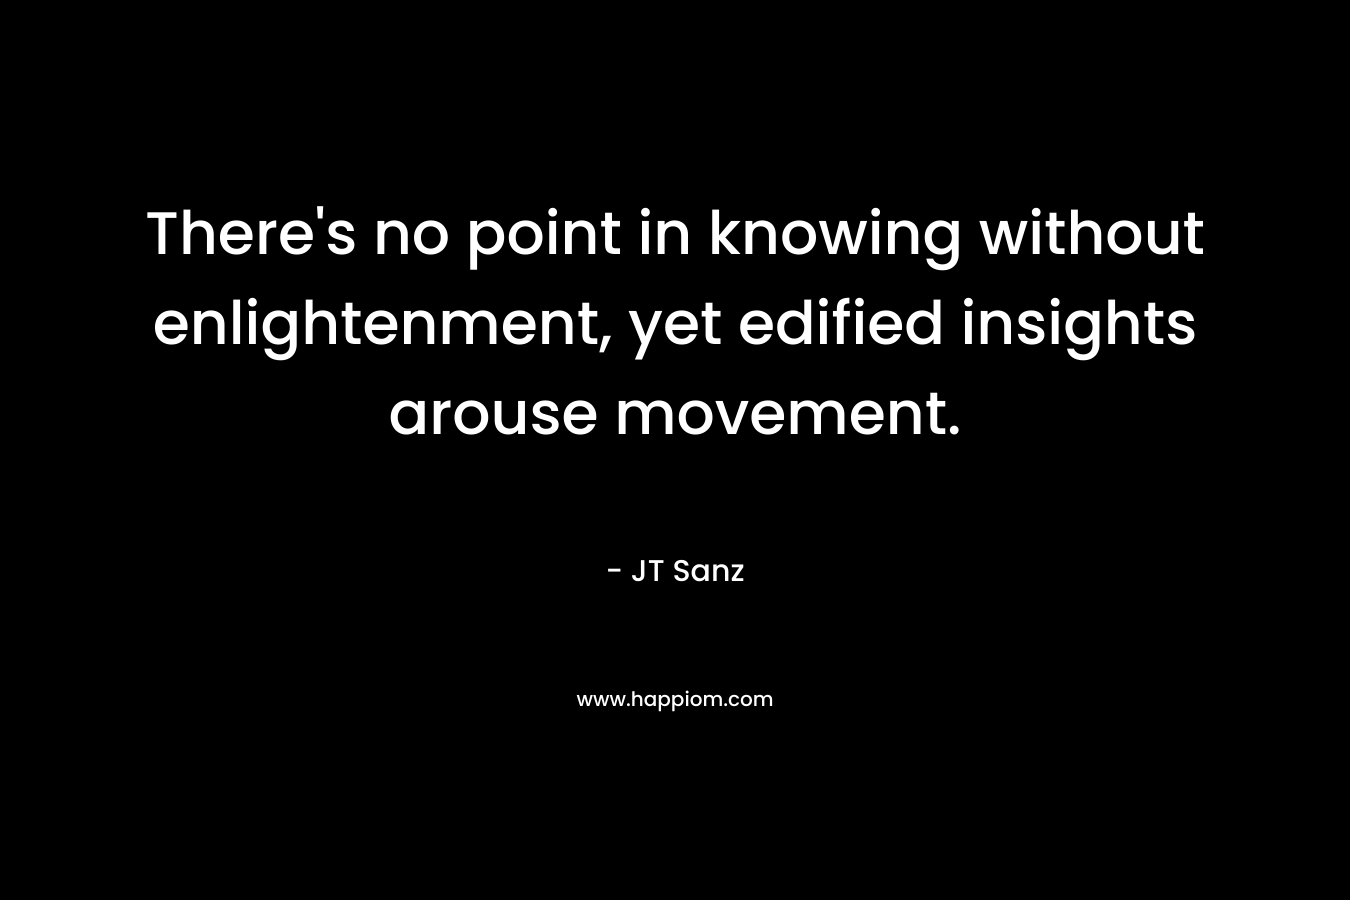 There's no point in knowing without enlightenment, yet edified insights arouse movement.